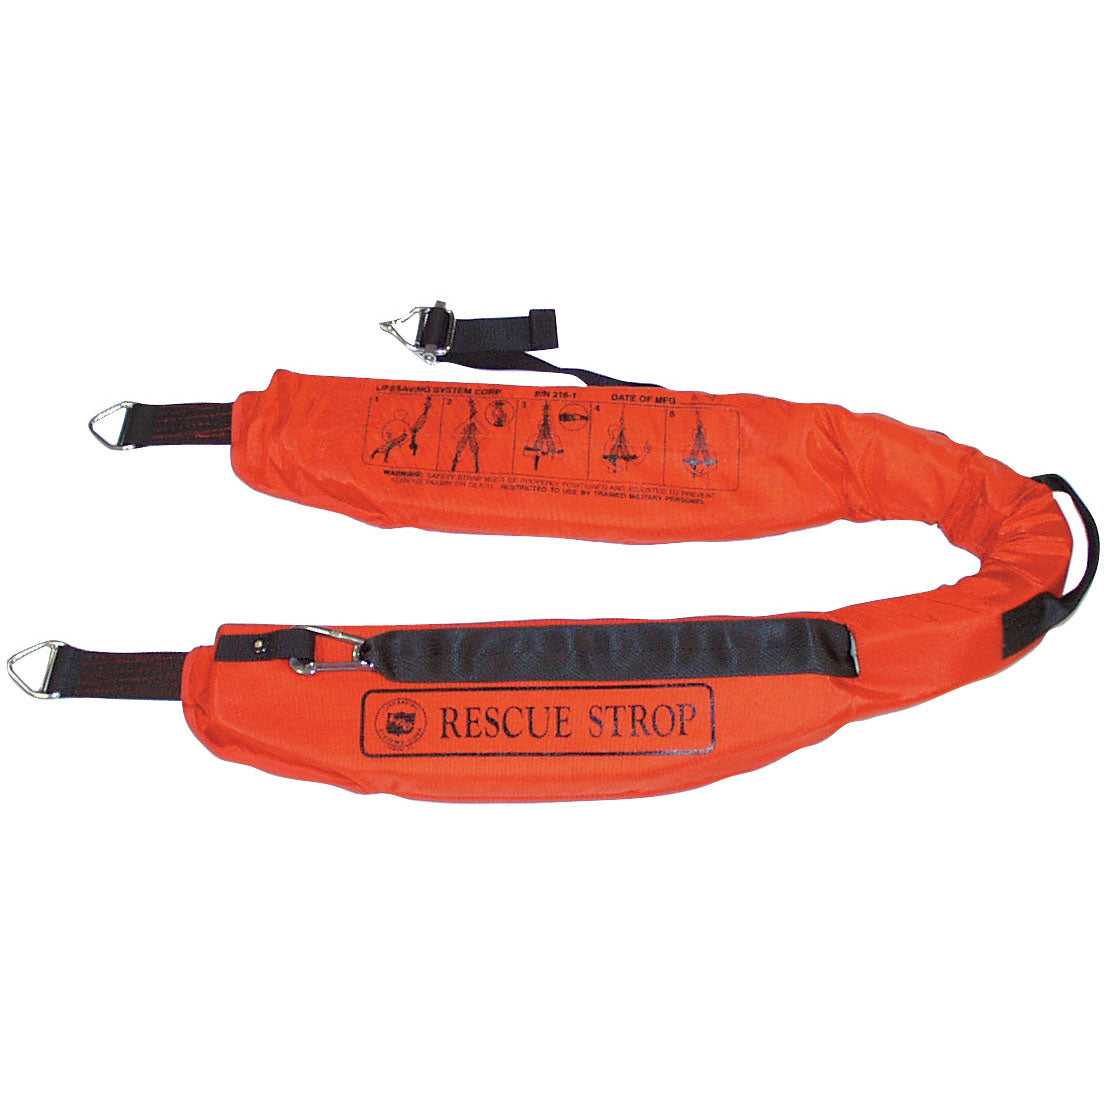 Sling, Rescue Strop  Life Support International, Inc.